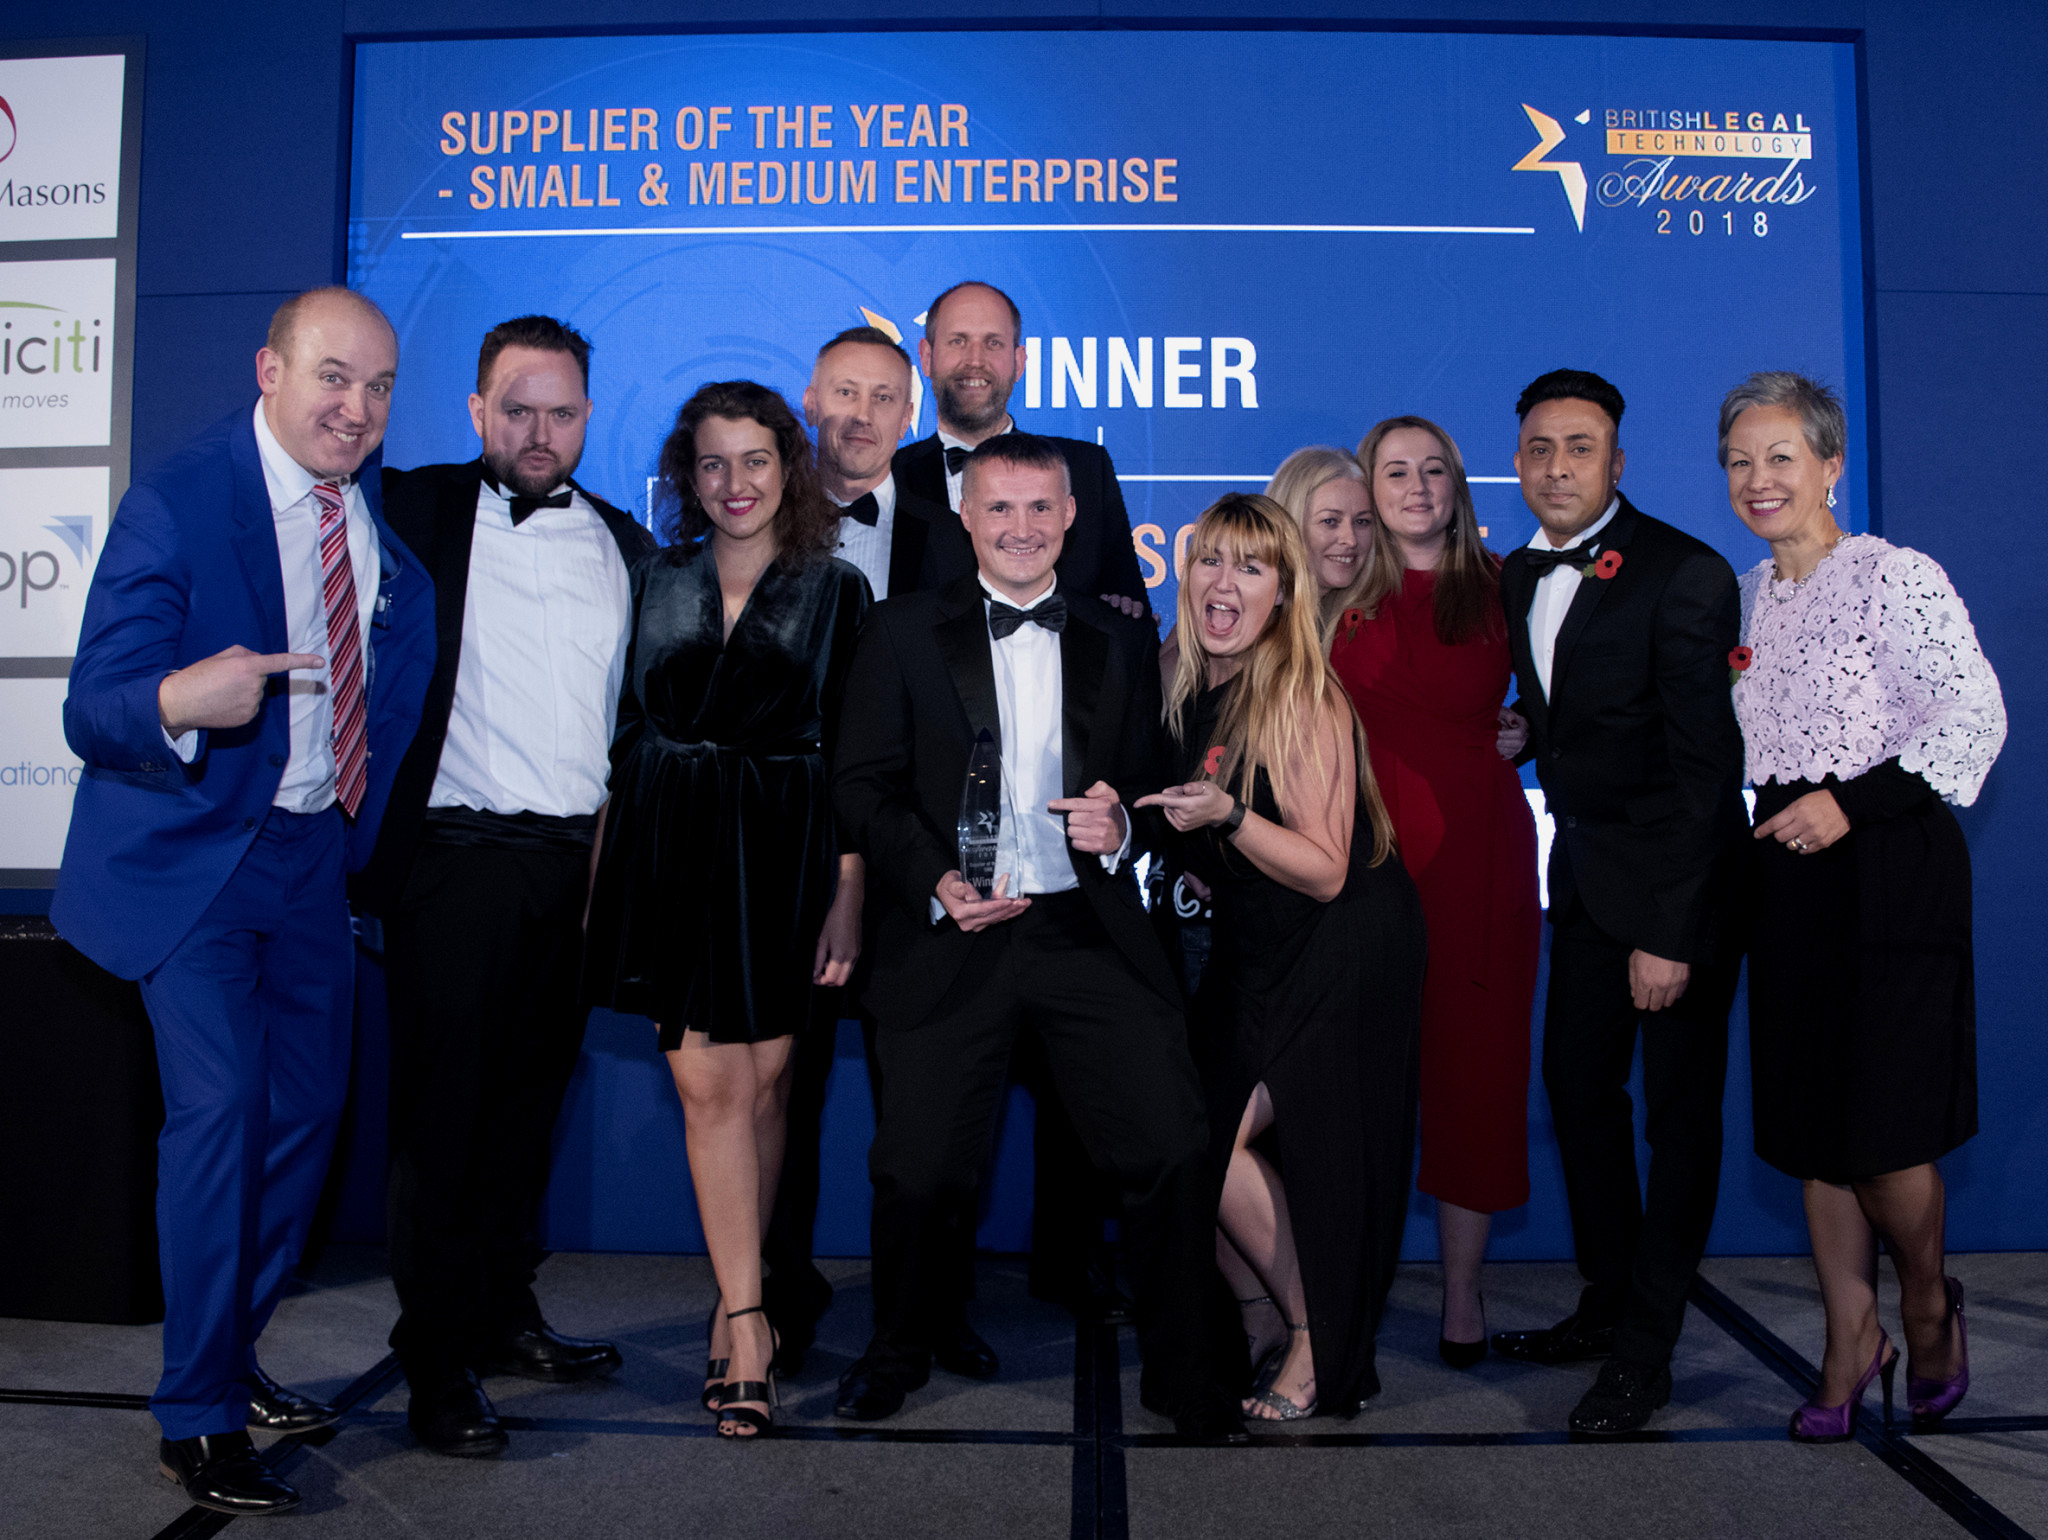 LEAP wins two awards at the British Legal Technology Awards 2018